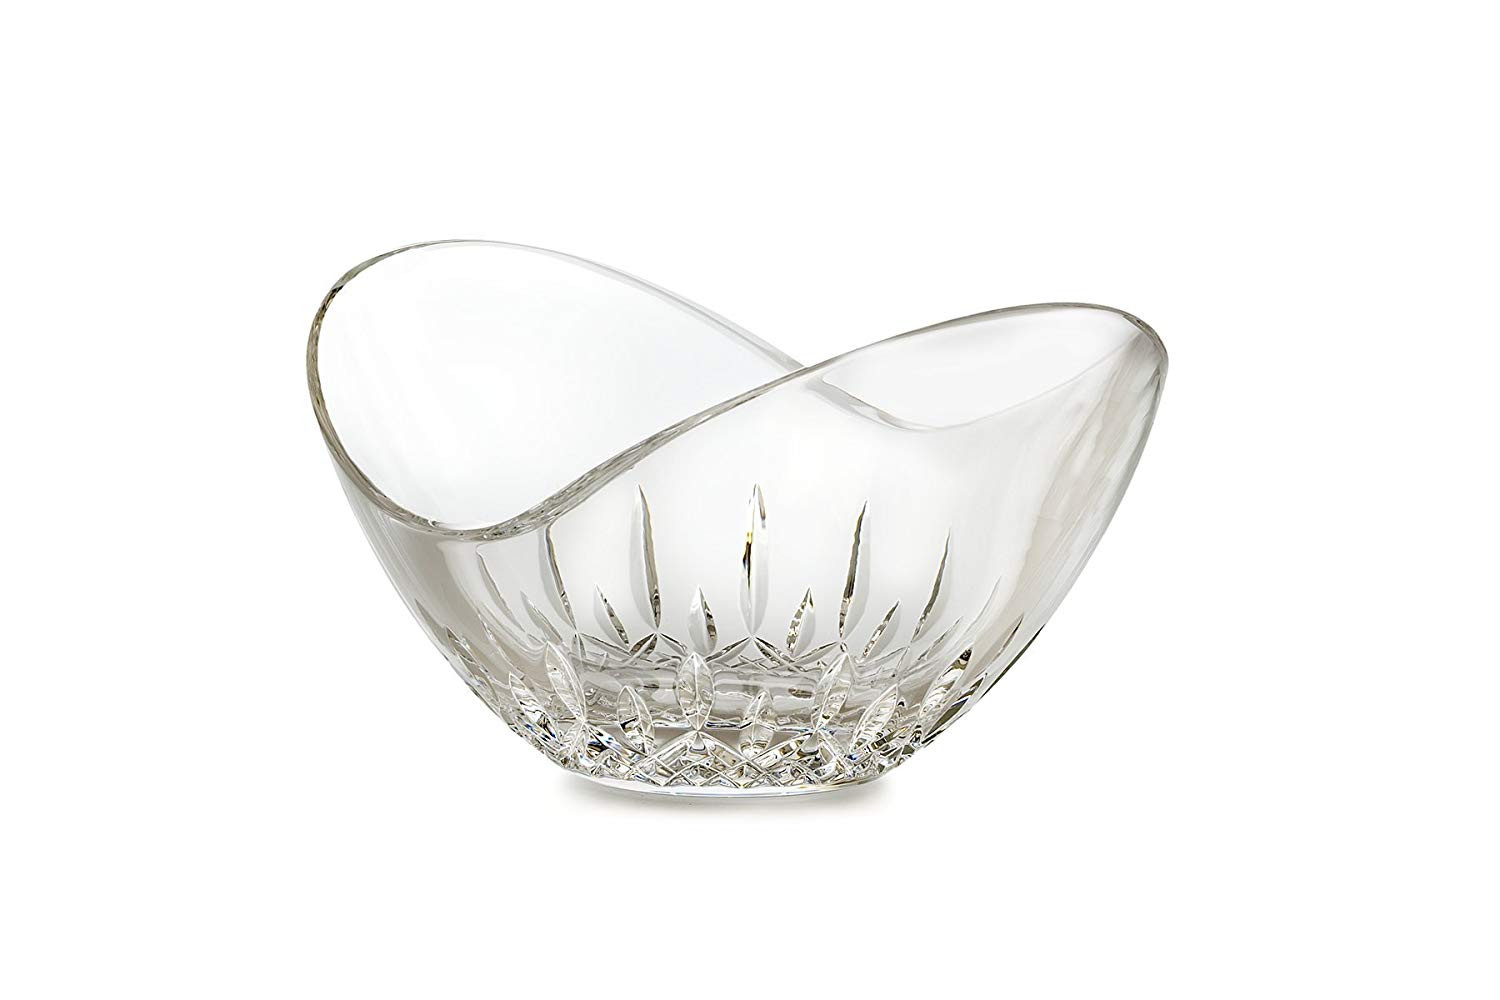 21 Unique Waterford Lismore Candy Bud Vase 2024 free download waterford lismore candy bud vase of amazon com waterford crystal lismore essence ellipse 6 inch bowl intended for amazon com waterford crystal lismore essence ellipse 6 inch bowl decorative 